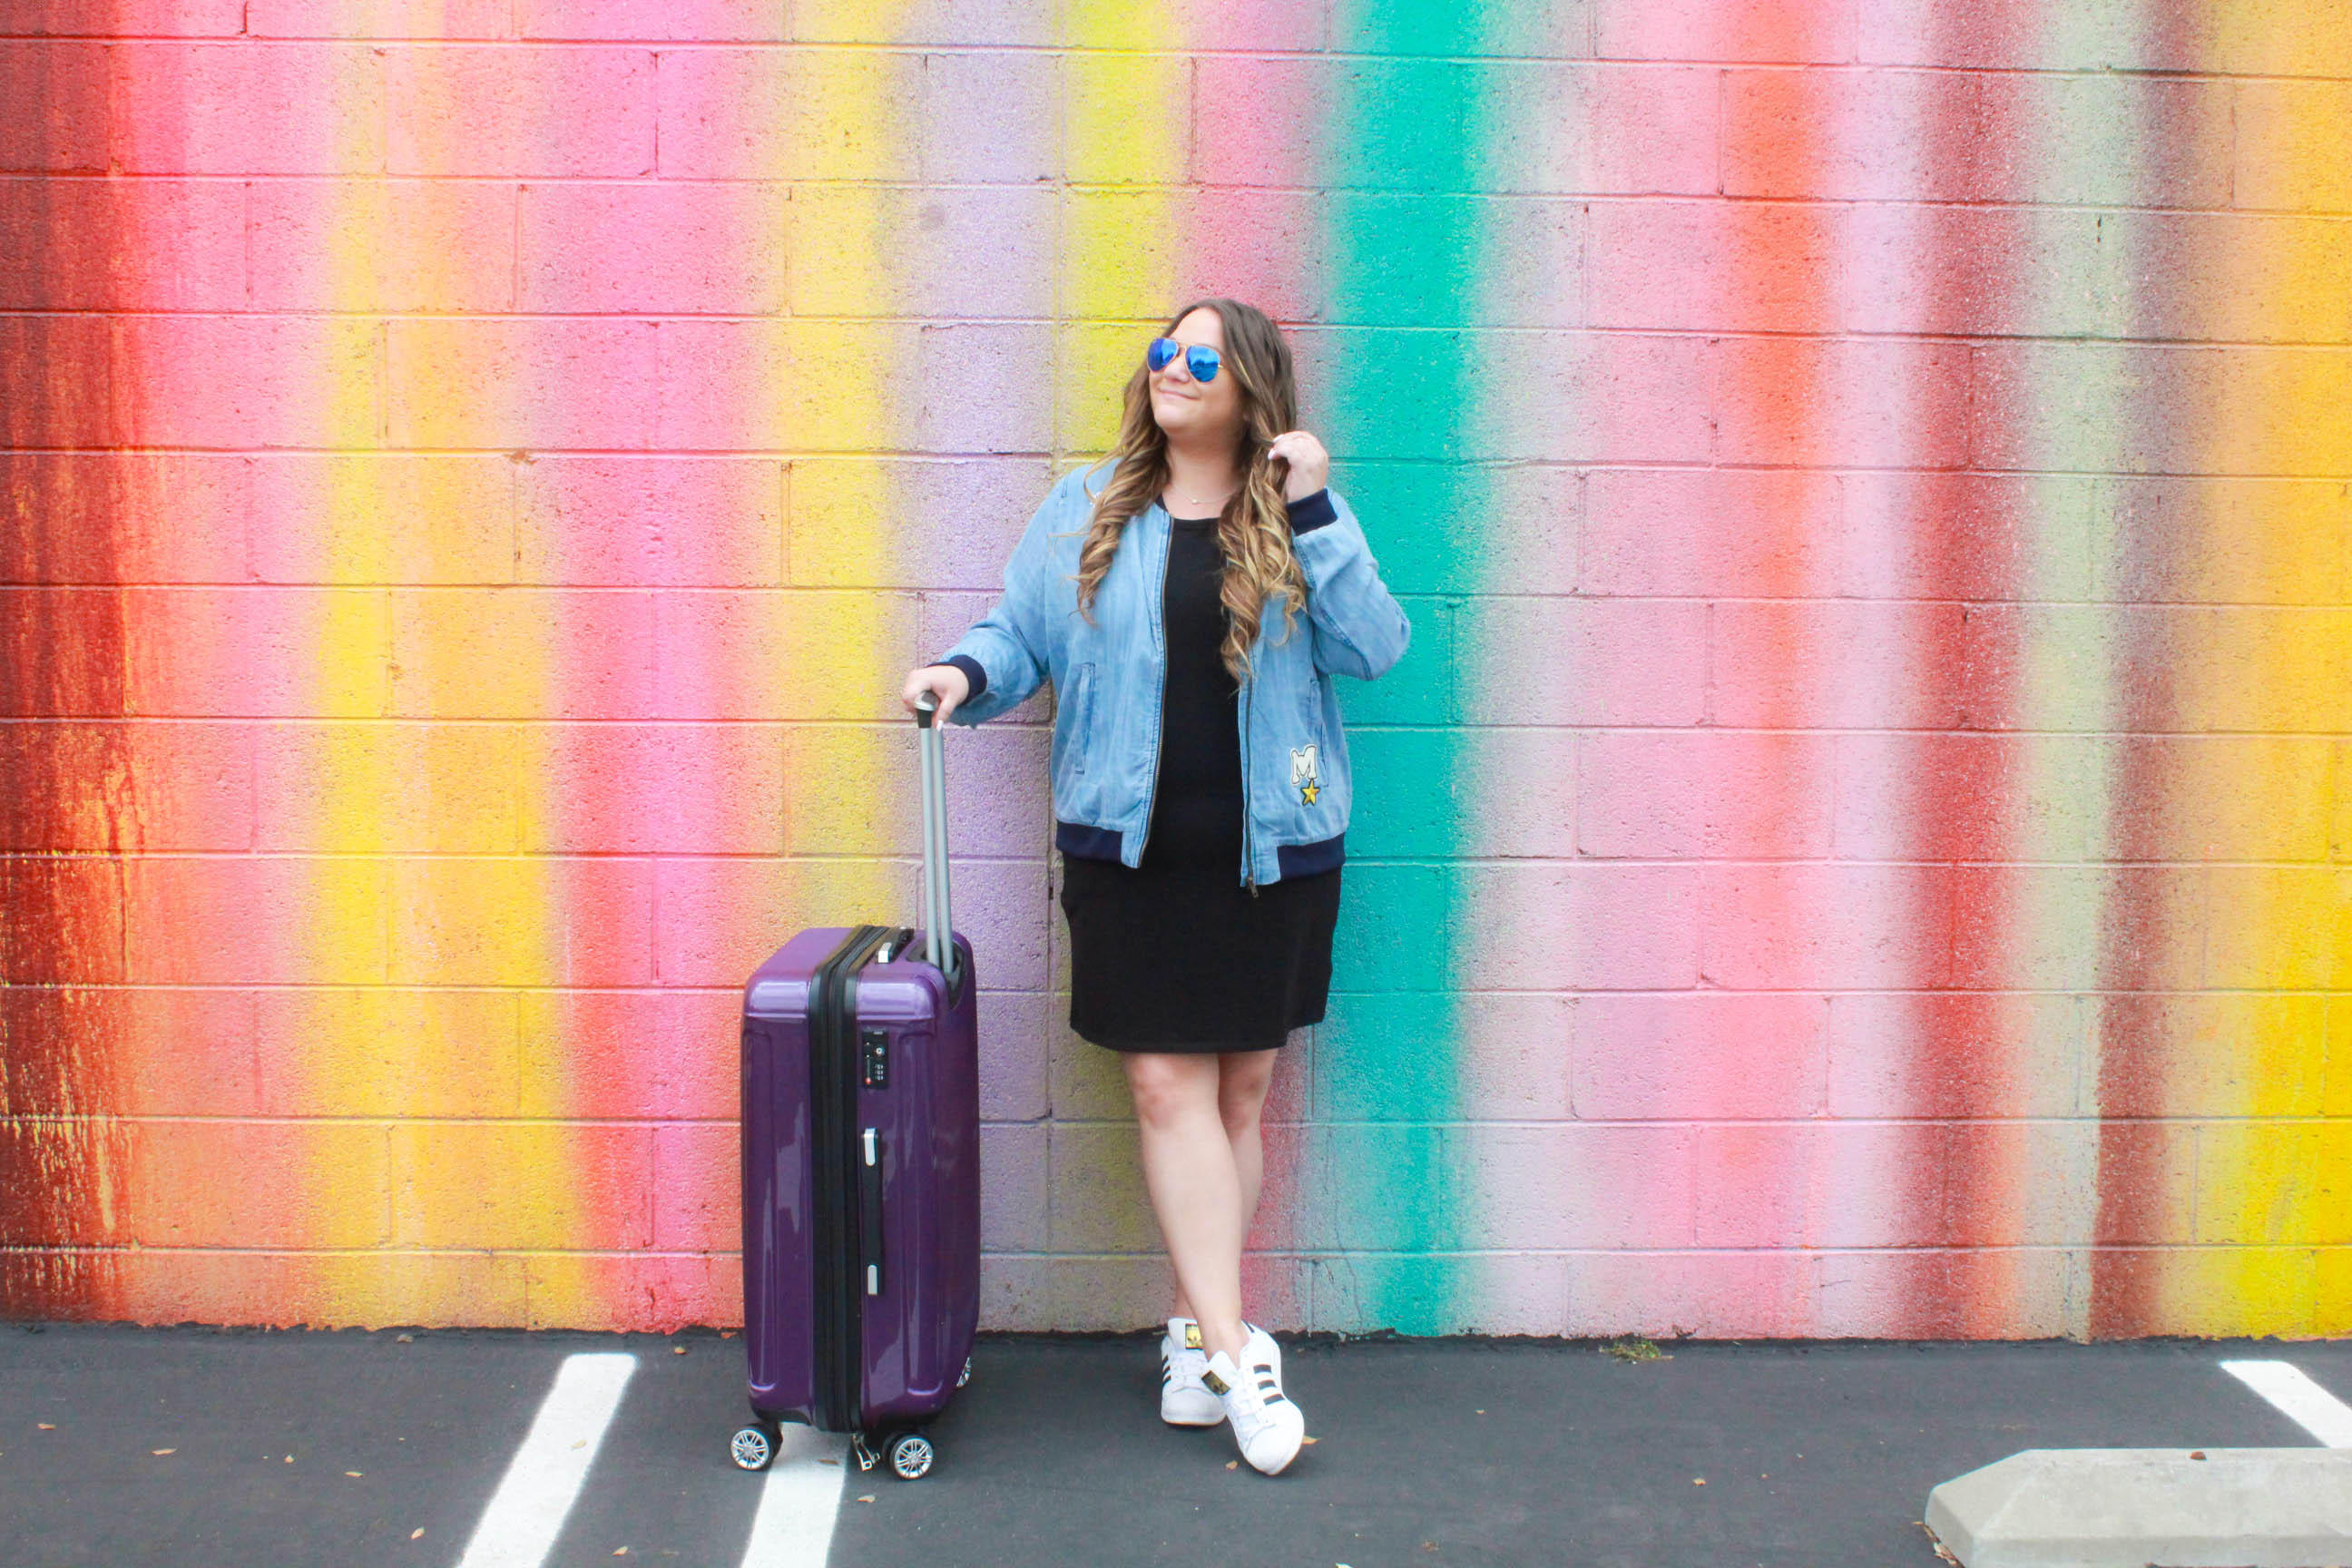 missyonmadison, missyonmadison instagram, fashion blog, fashion blogger, style blog, style blogger, melissa tierney, missyonmadiosn instagram, missyonmadison blog, travel blog, travel blogger, luggage reviews, gabbiano luggae, gabbiano luggage review, pasadena colored wall, la wall crawl, la colorful walls, colorful walls in la, blogger, la blogger, travel goals, packing tips, travel style, what to wear when traveling, purple luggage, gabbiano luggage, bloglovin, travel guide, travel buys,